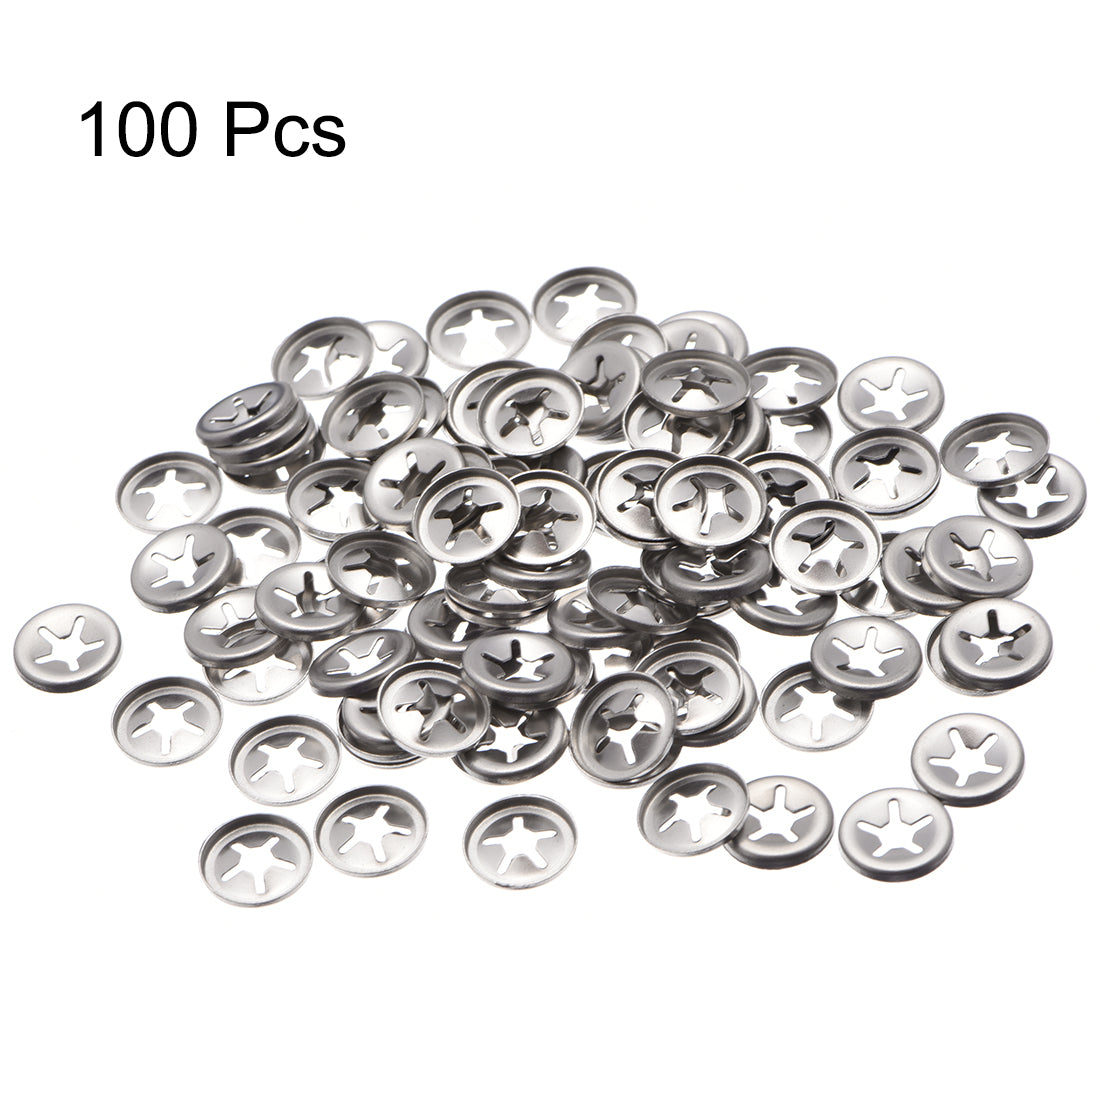 Uxcell Uxcell Star Locking Washers M5 x12 Internal Tooth Push On Locking Washers Clips Fasteners Assortment Kit Silver Tone 100 pcs